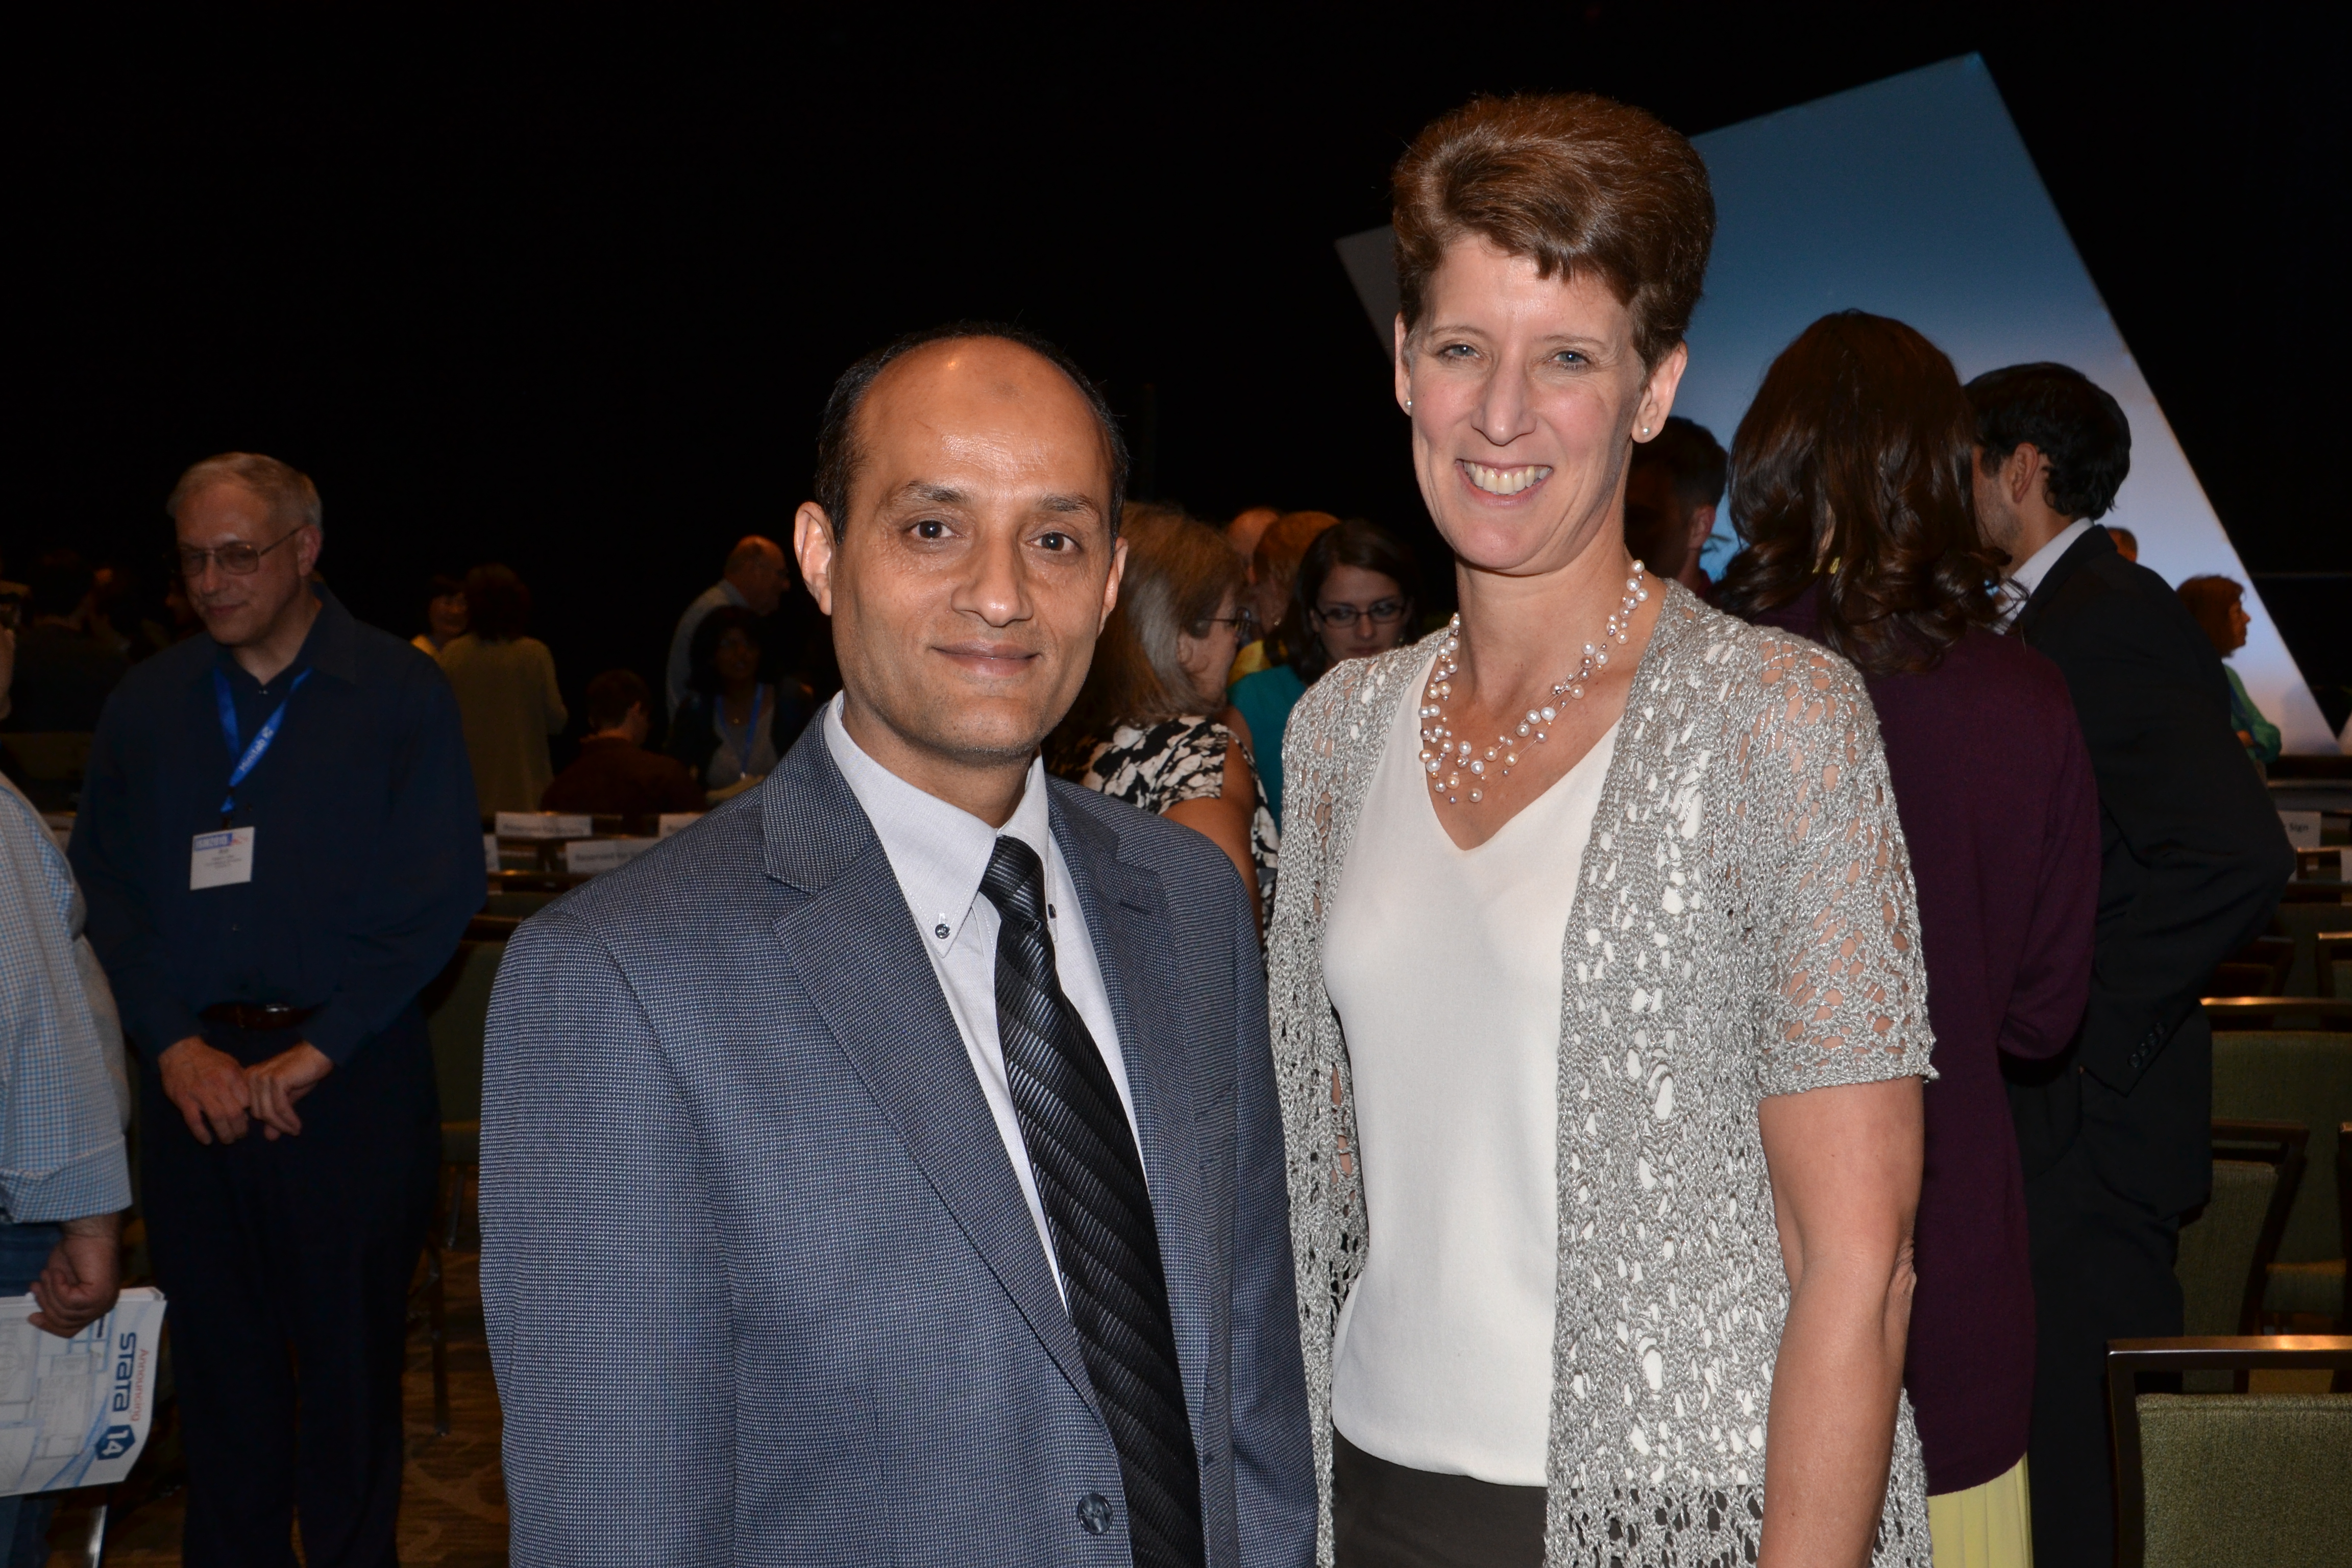 ASA Fellow Abdus Wahed and former ASA President Sally Morton attend the Fellows reception.